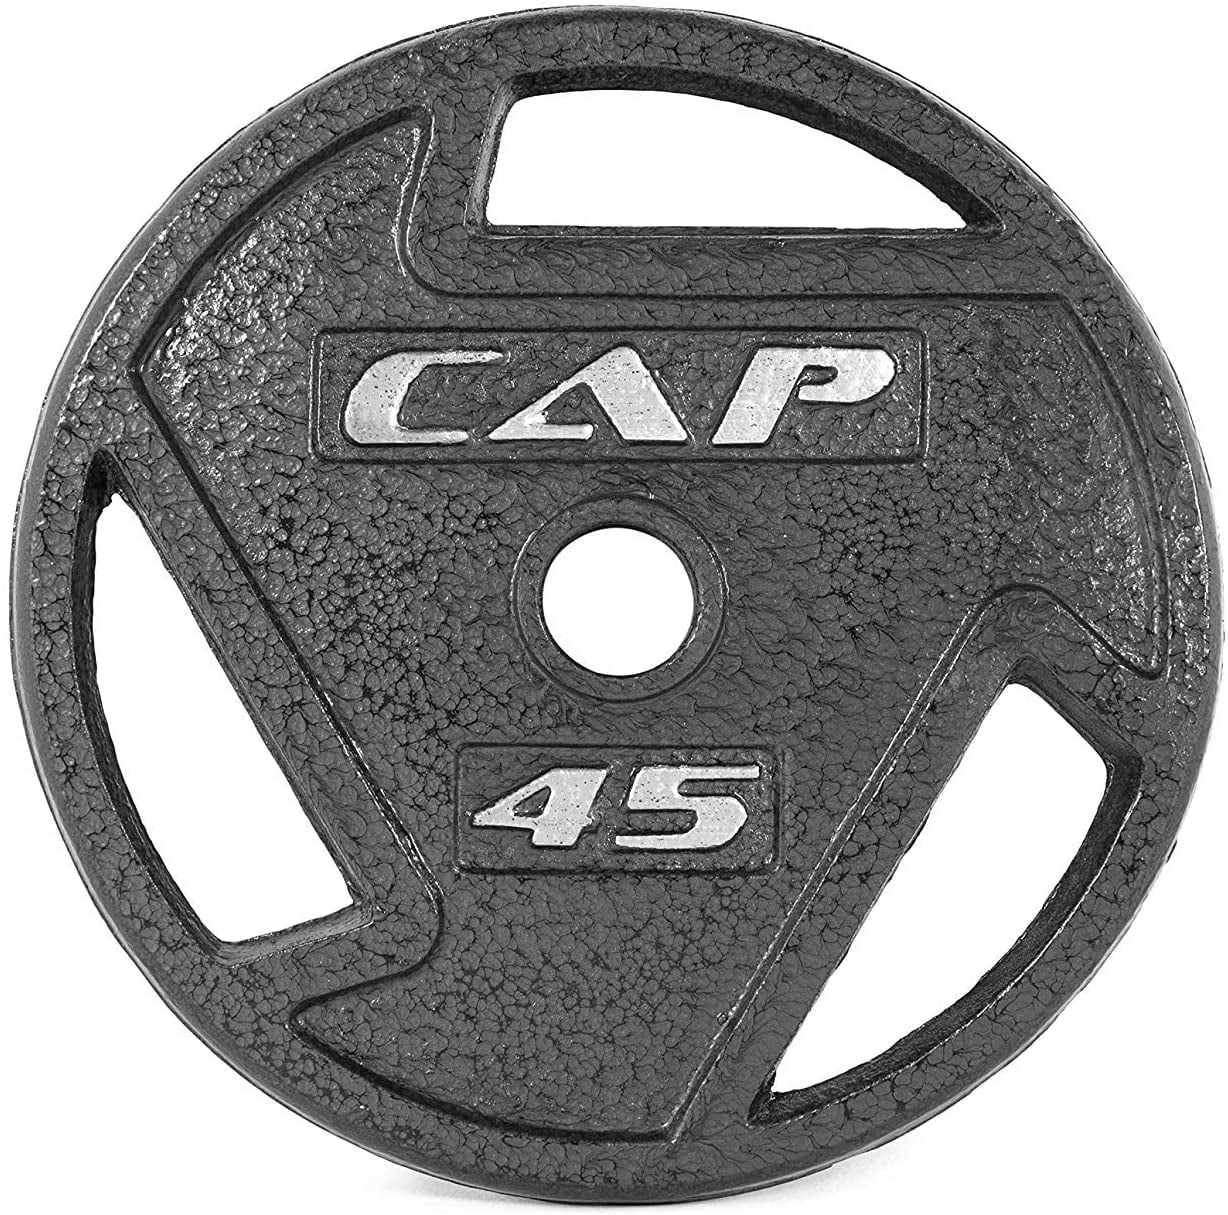 50 Lbs Fast Ship x2 25 LB CAP 1" Hole Iron GRIP Weight Plates Pair Set of Two